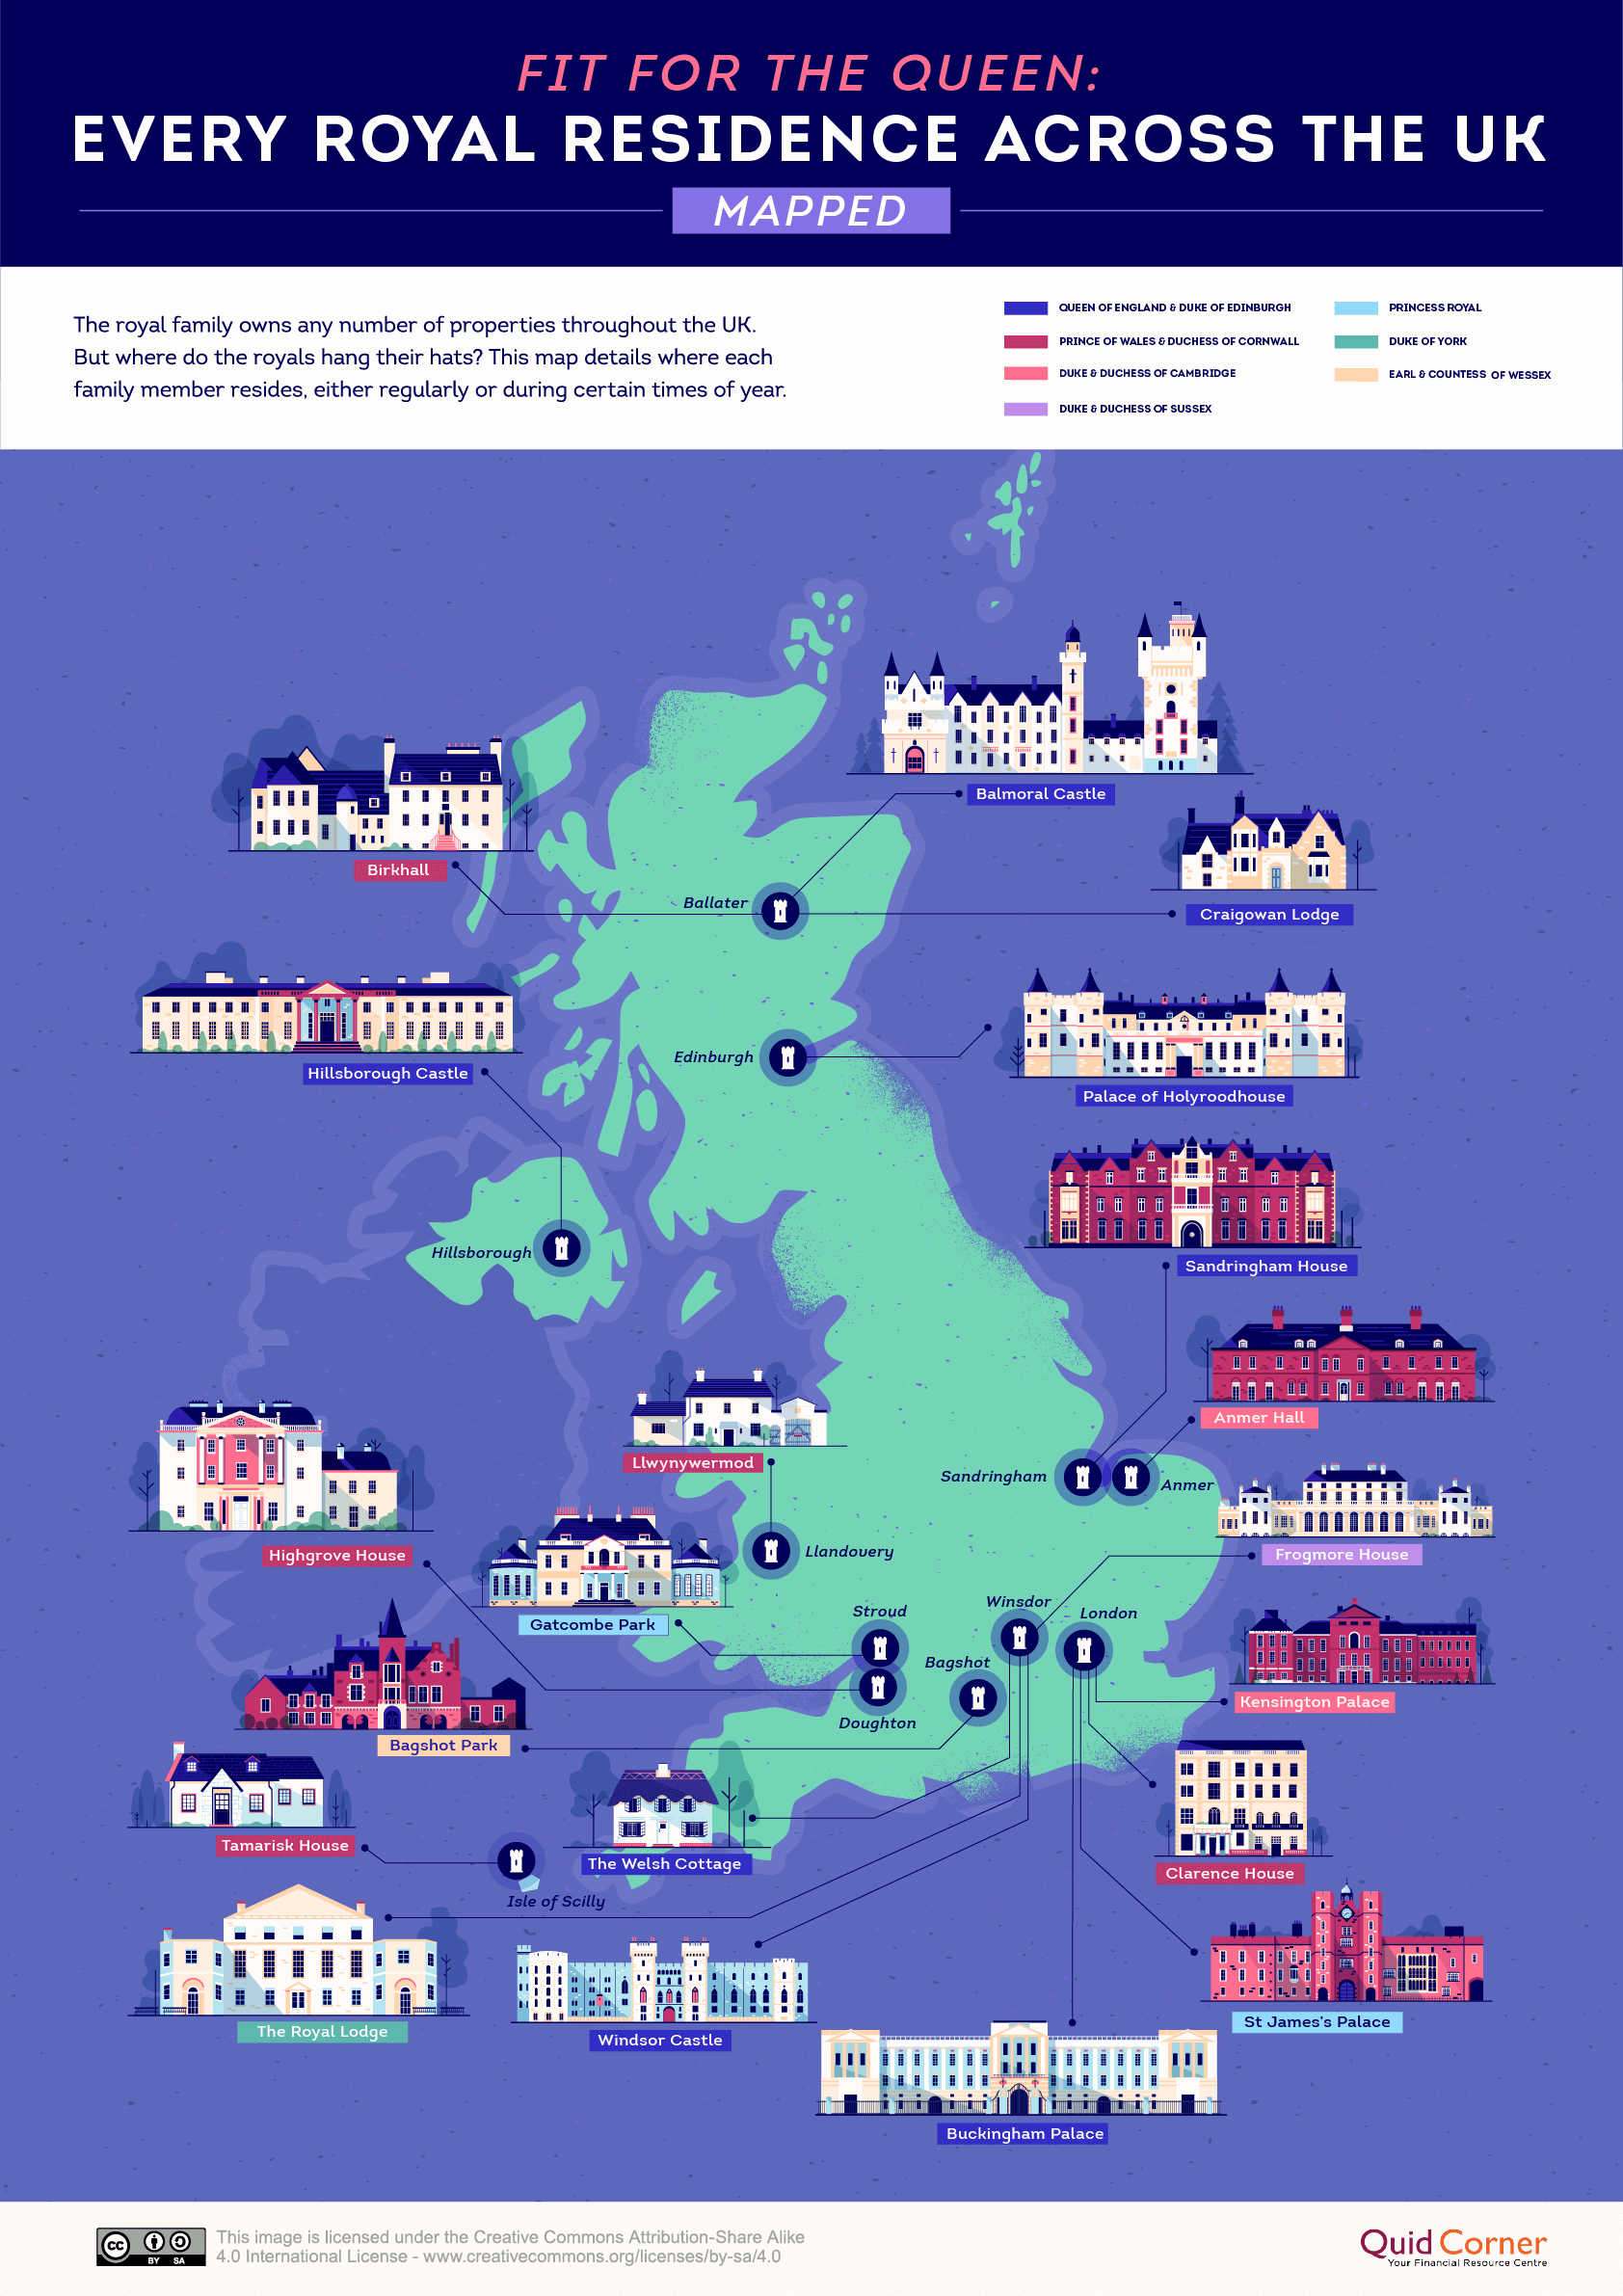 Every Royal Residence Across the UK Mapped